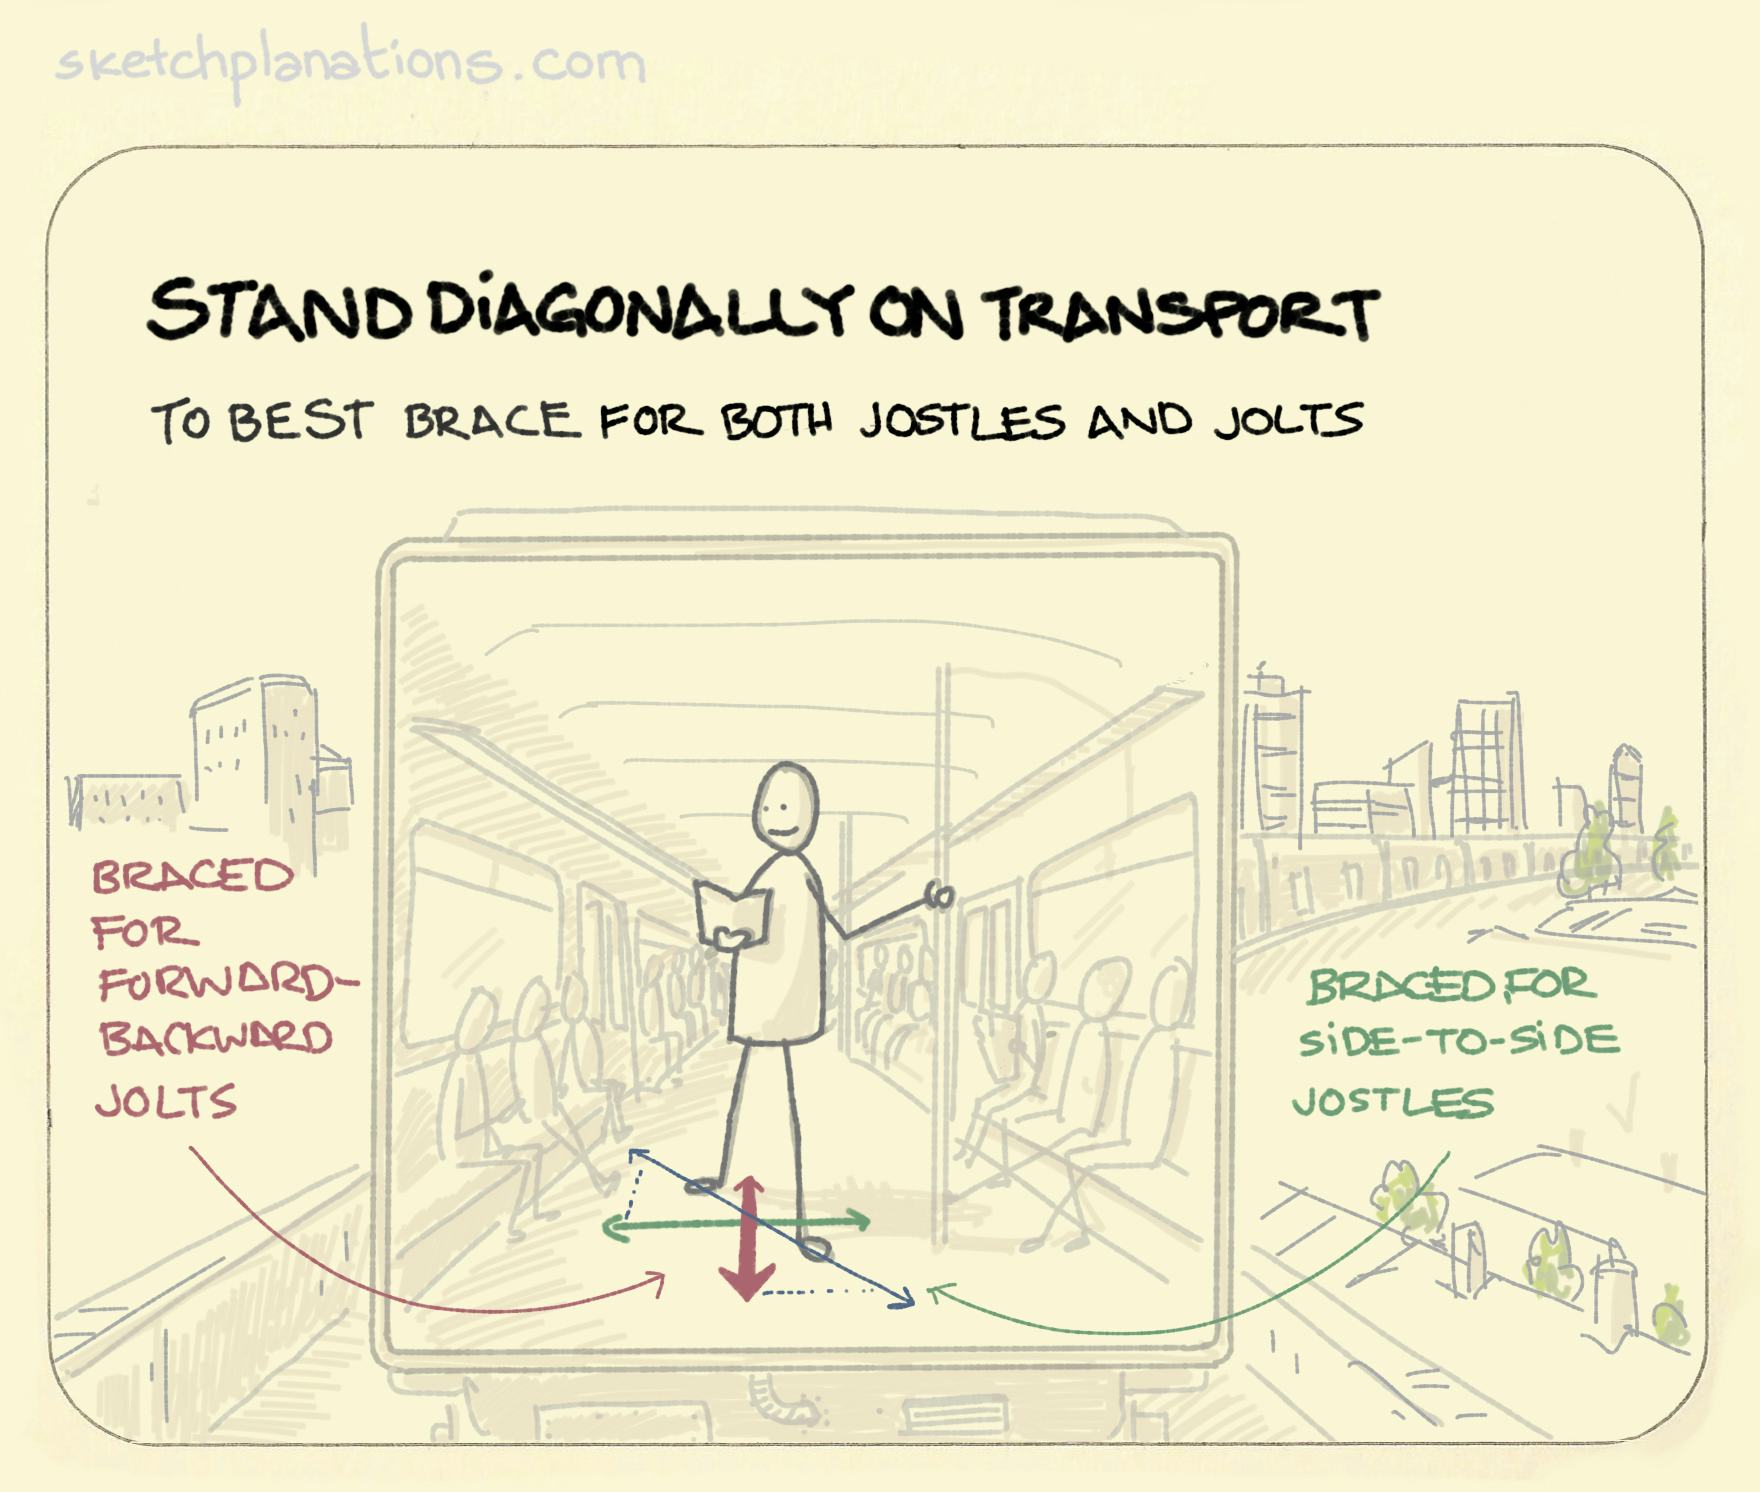 Stand diagonally on transport - Sketchplanations